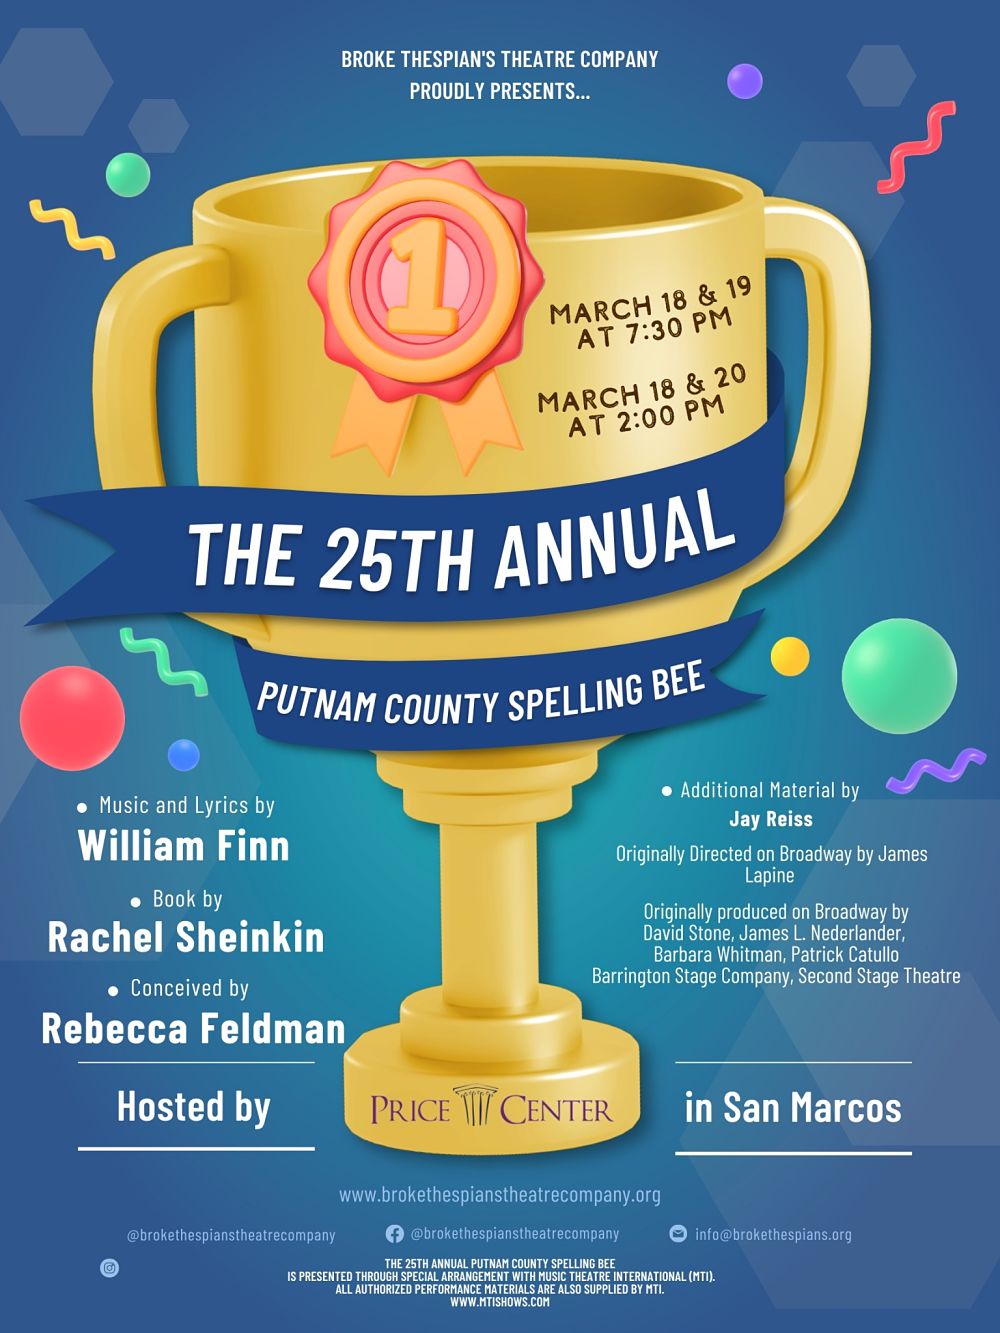 The 25th Annual Putnam County Spelling Bee by Broke Thespian's Theatre Company